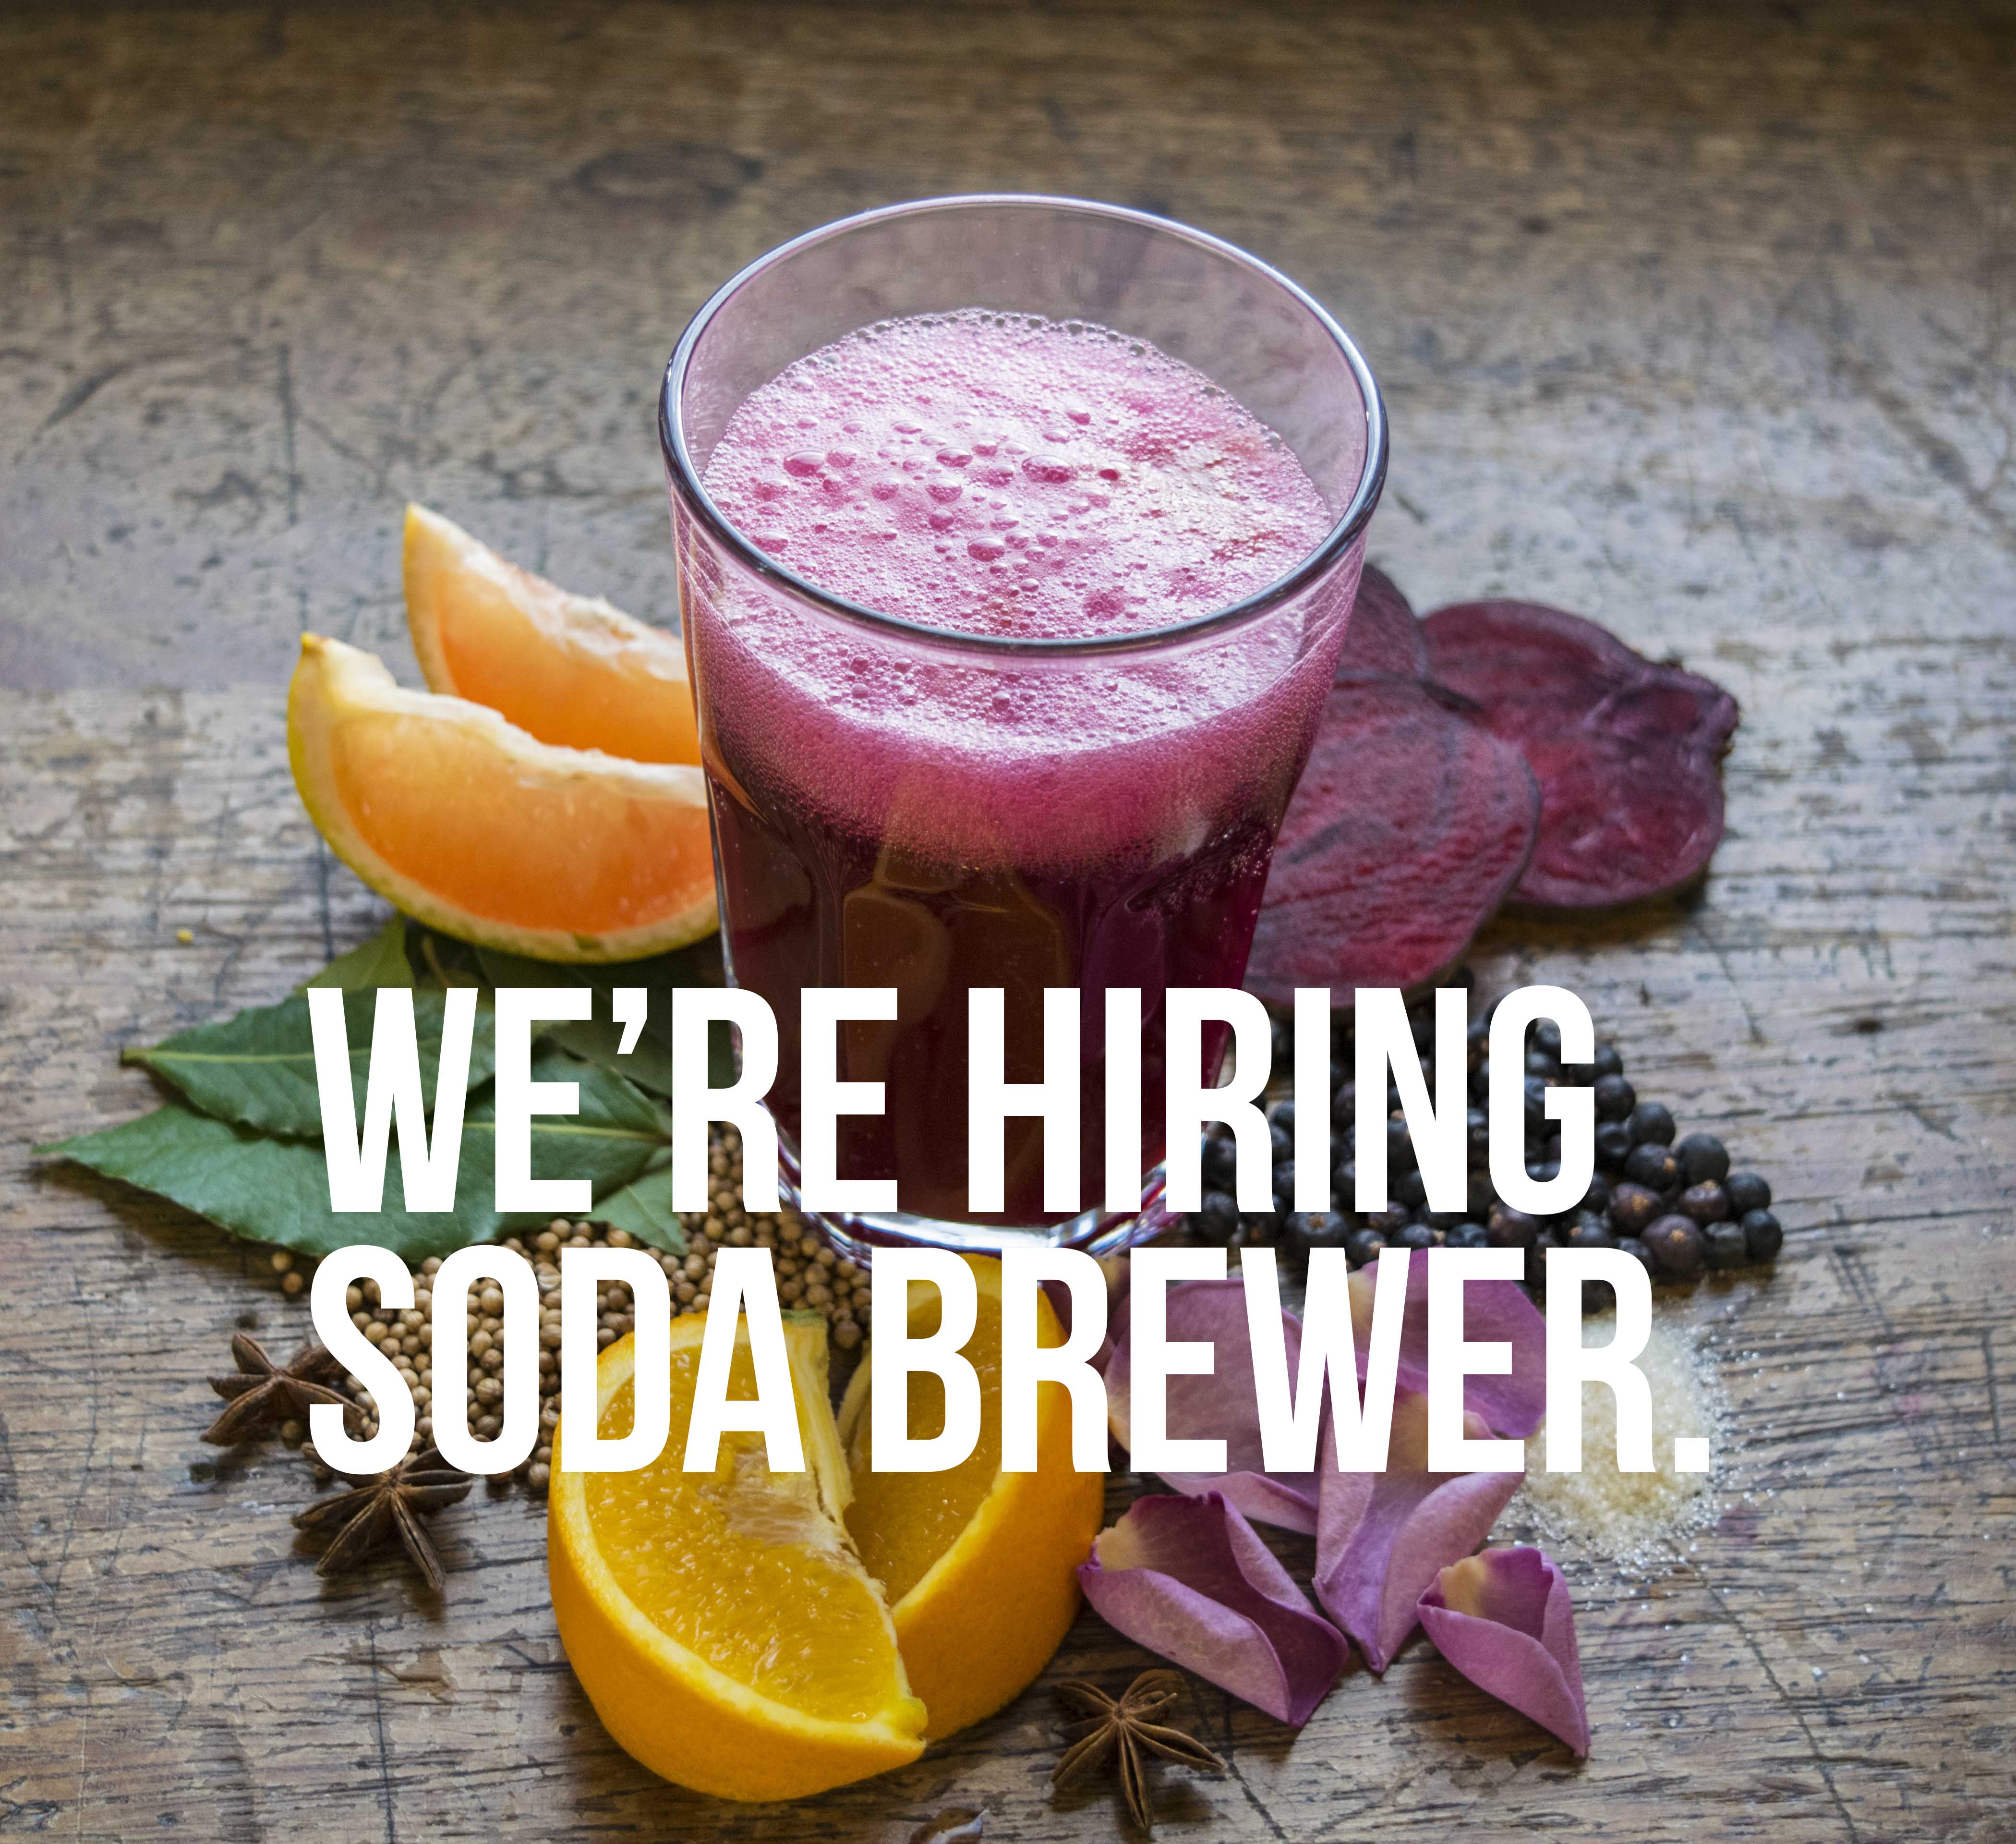 Roots Soda Co. we are hiring image.